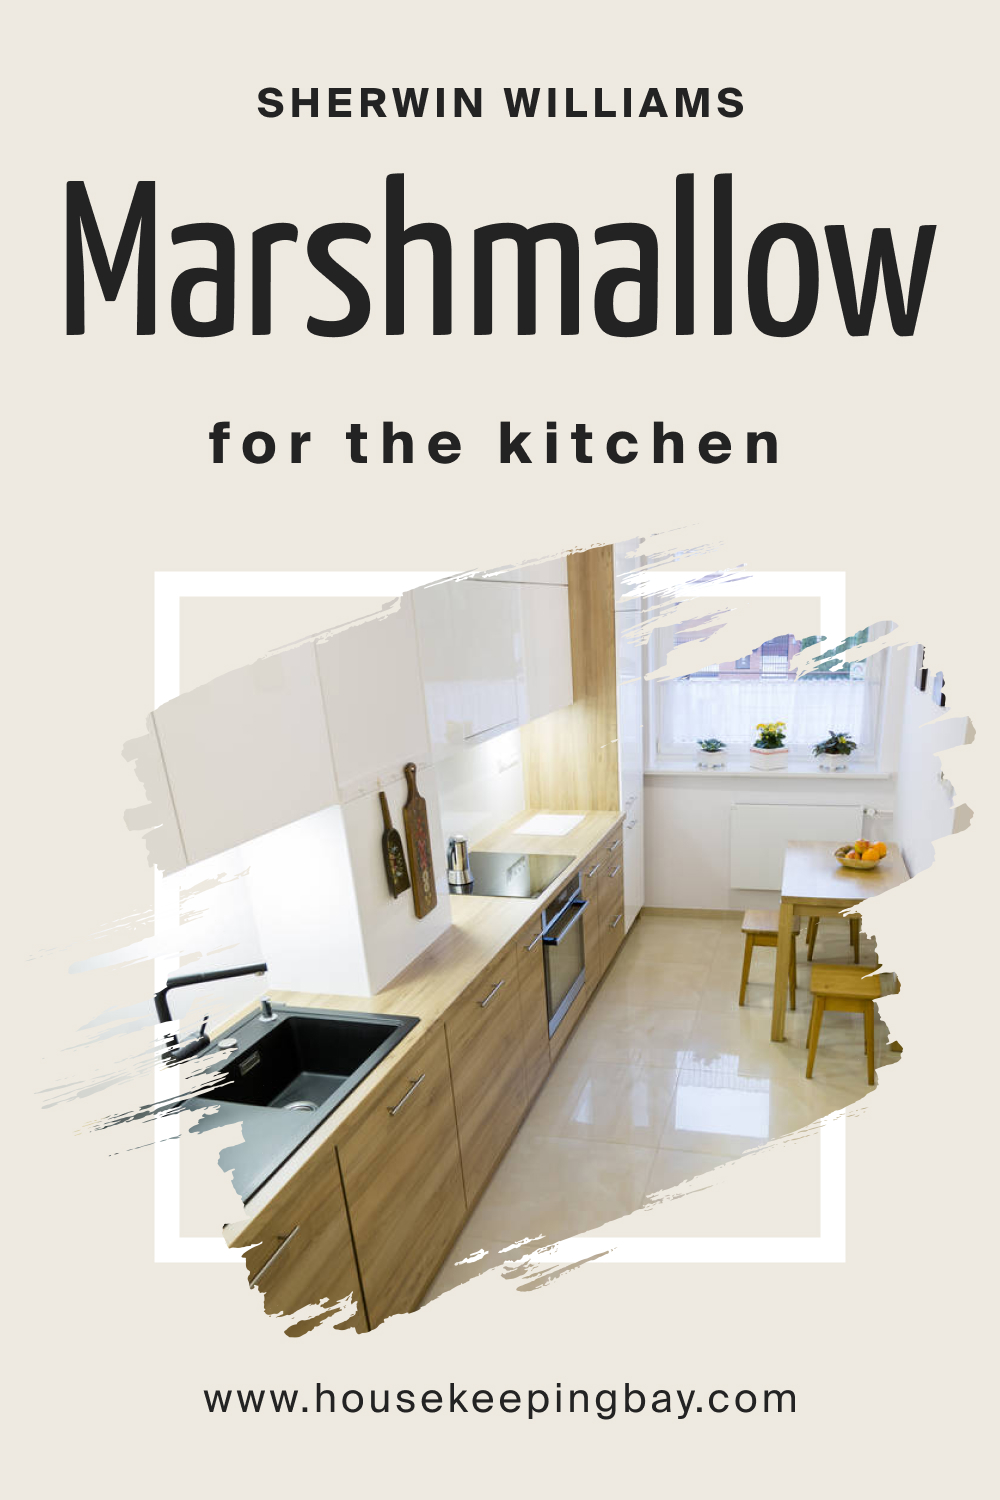 Sherwin Williams. SW Marshmallow For the Kitchen